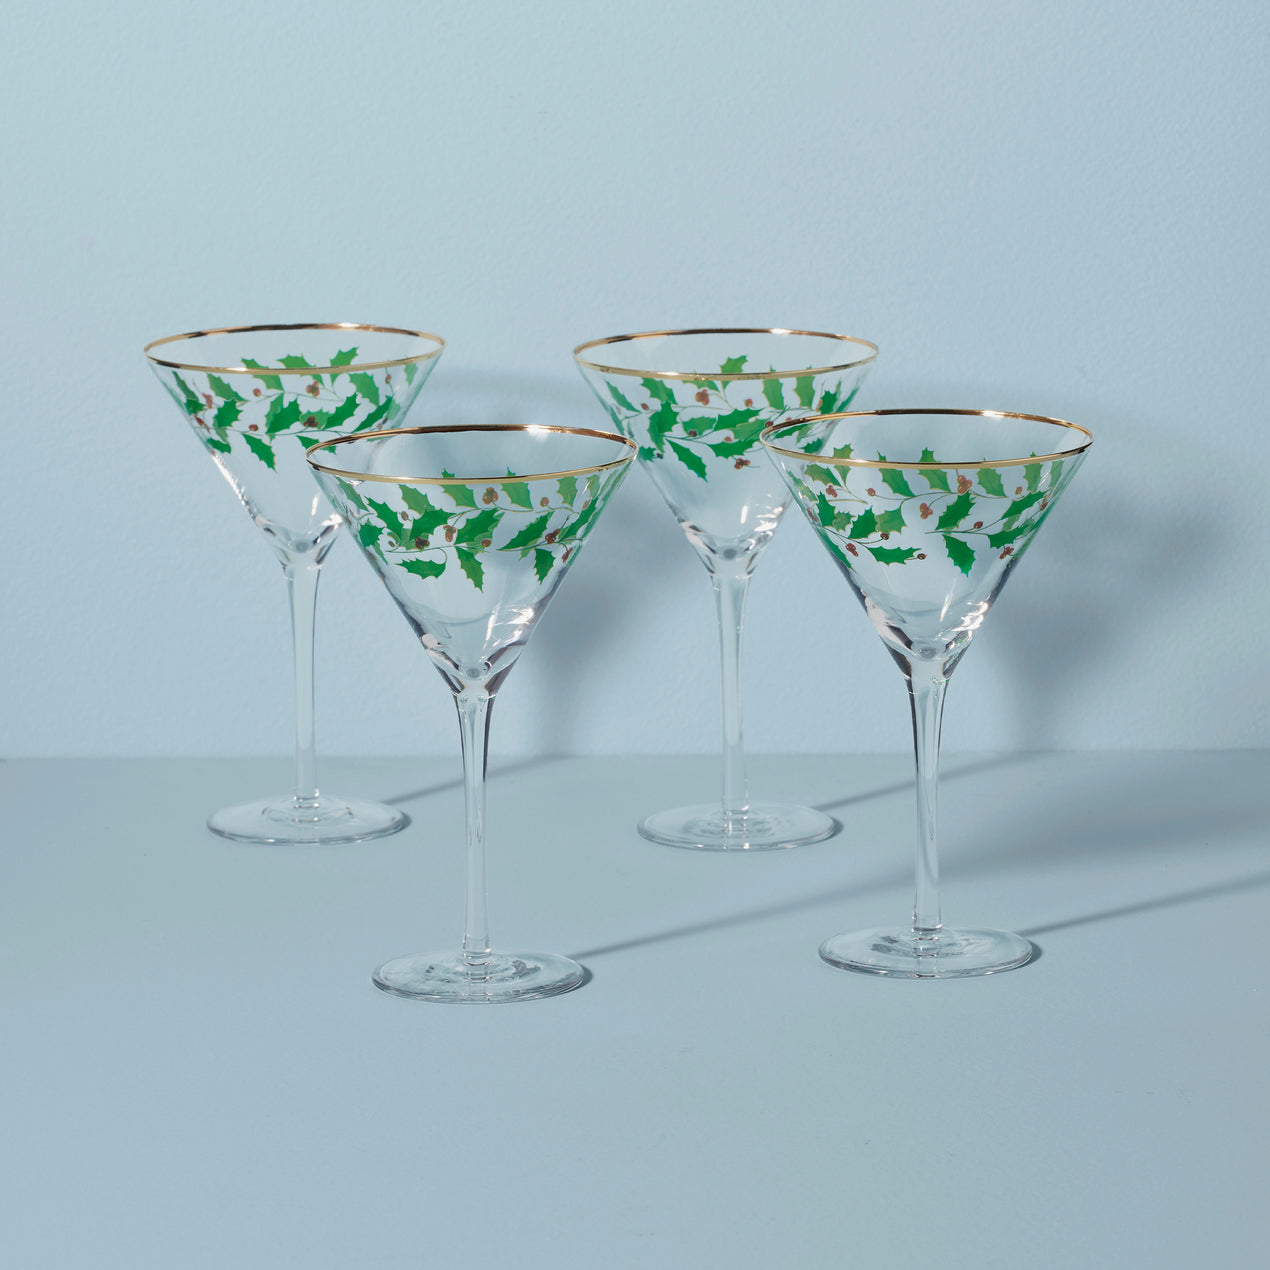 Cheers® Set of 4 Stemless Martini Glasses